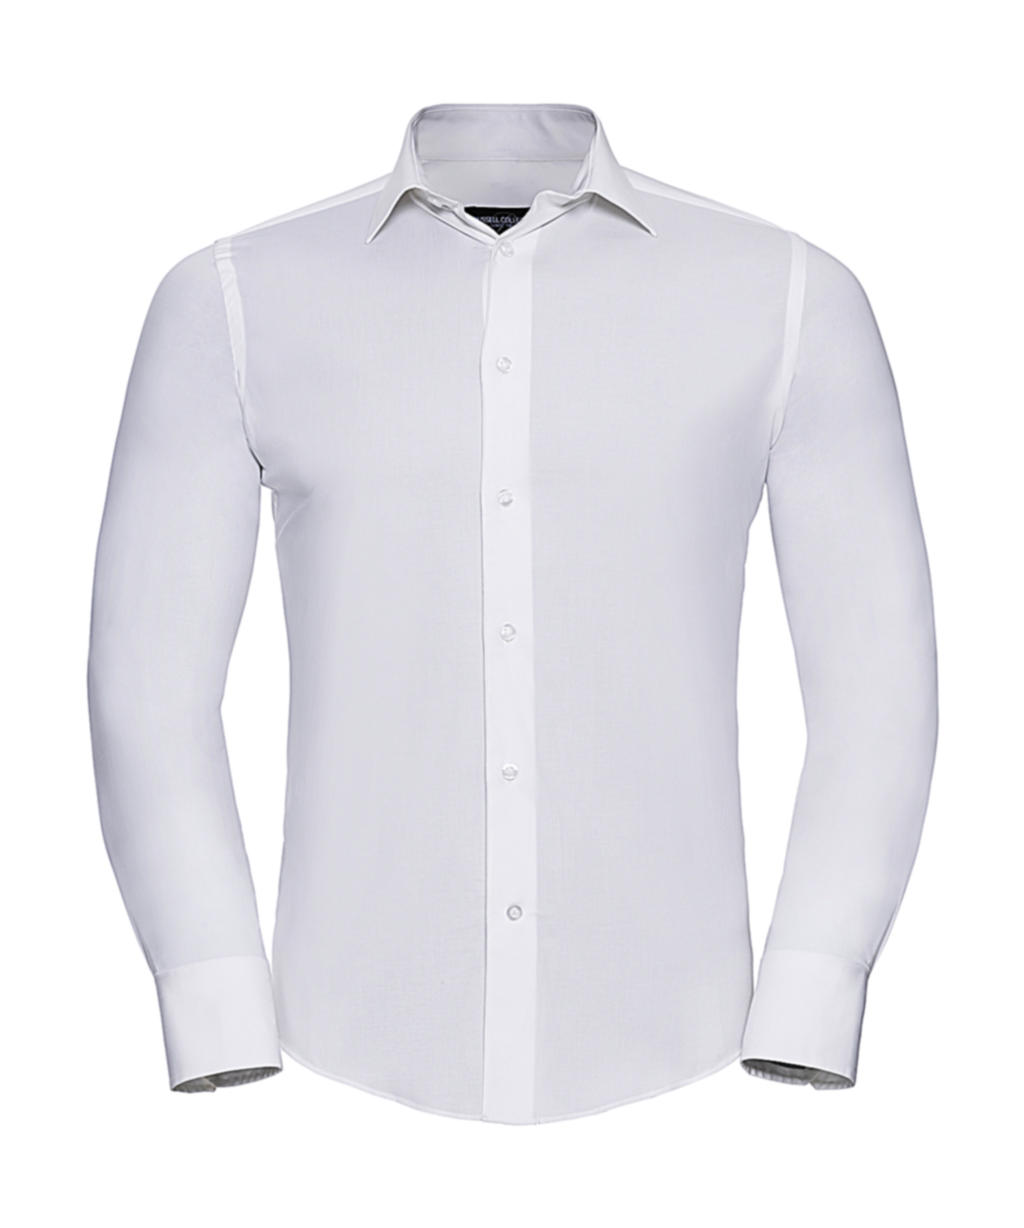 Fitted Long Sleeve Stretch Shirt